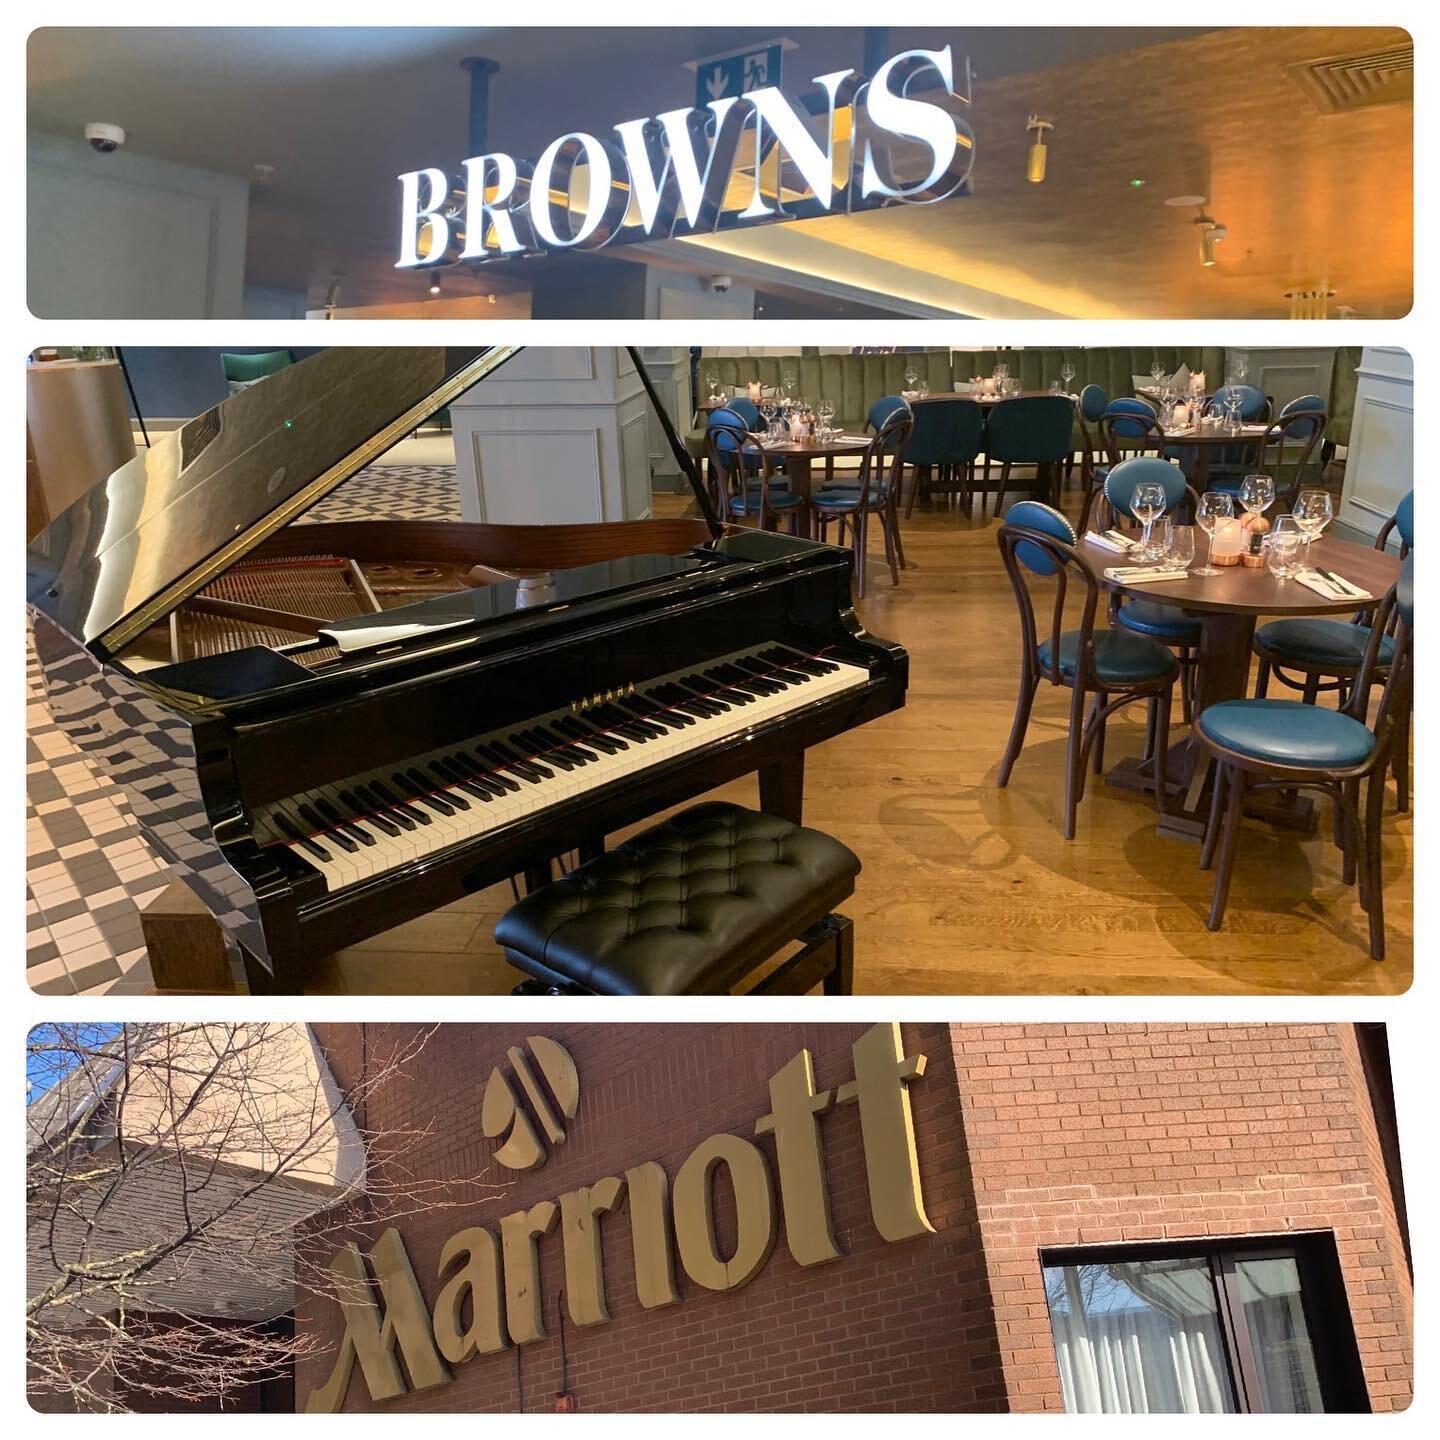 Interesting afternoon tuning at Browns restaurant in the Marriot Hotel, Cardiff&hellip;A rather smart YAMAHA GB1&hellip;In a rather swanky restaurant. Lovely setting. 🎹😎💪